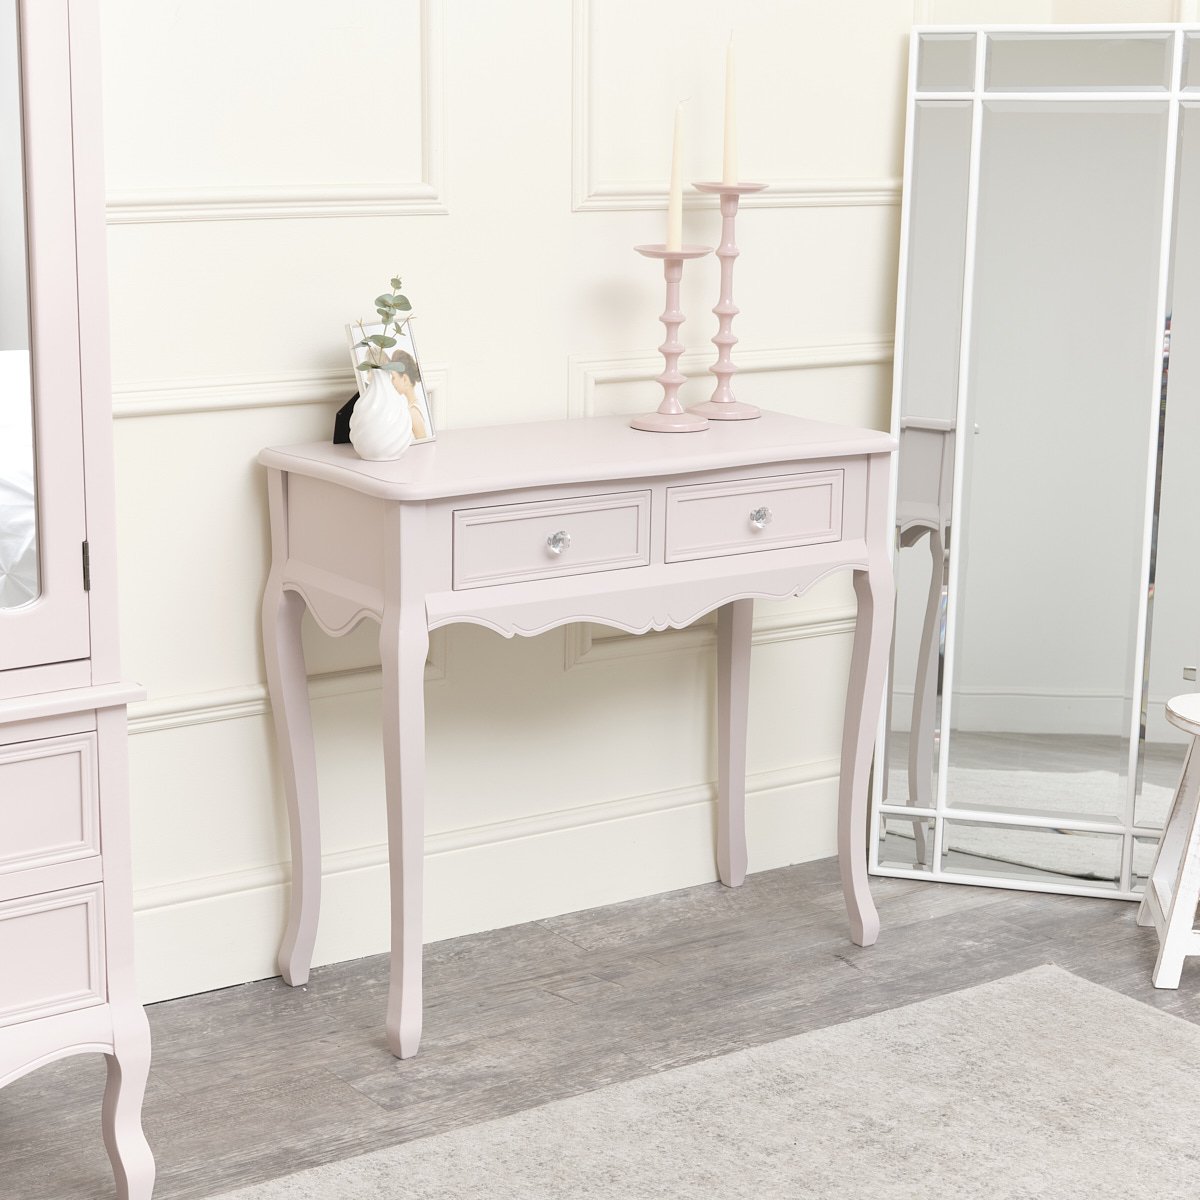 Pink Console / Dressing Table - Victoria Pink Range